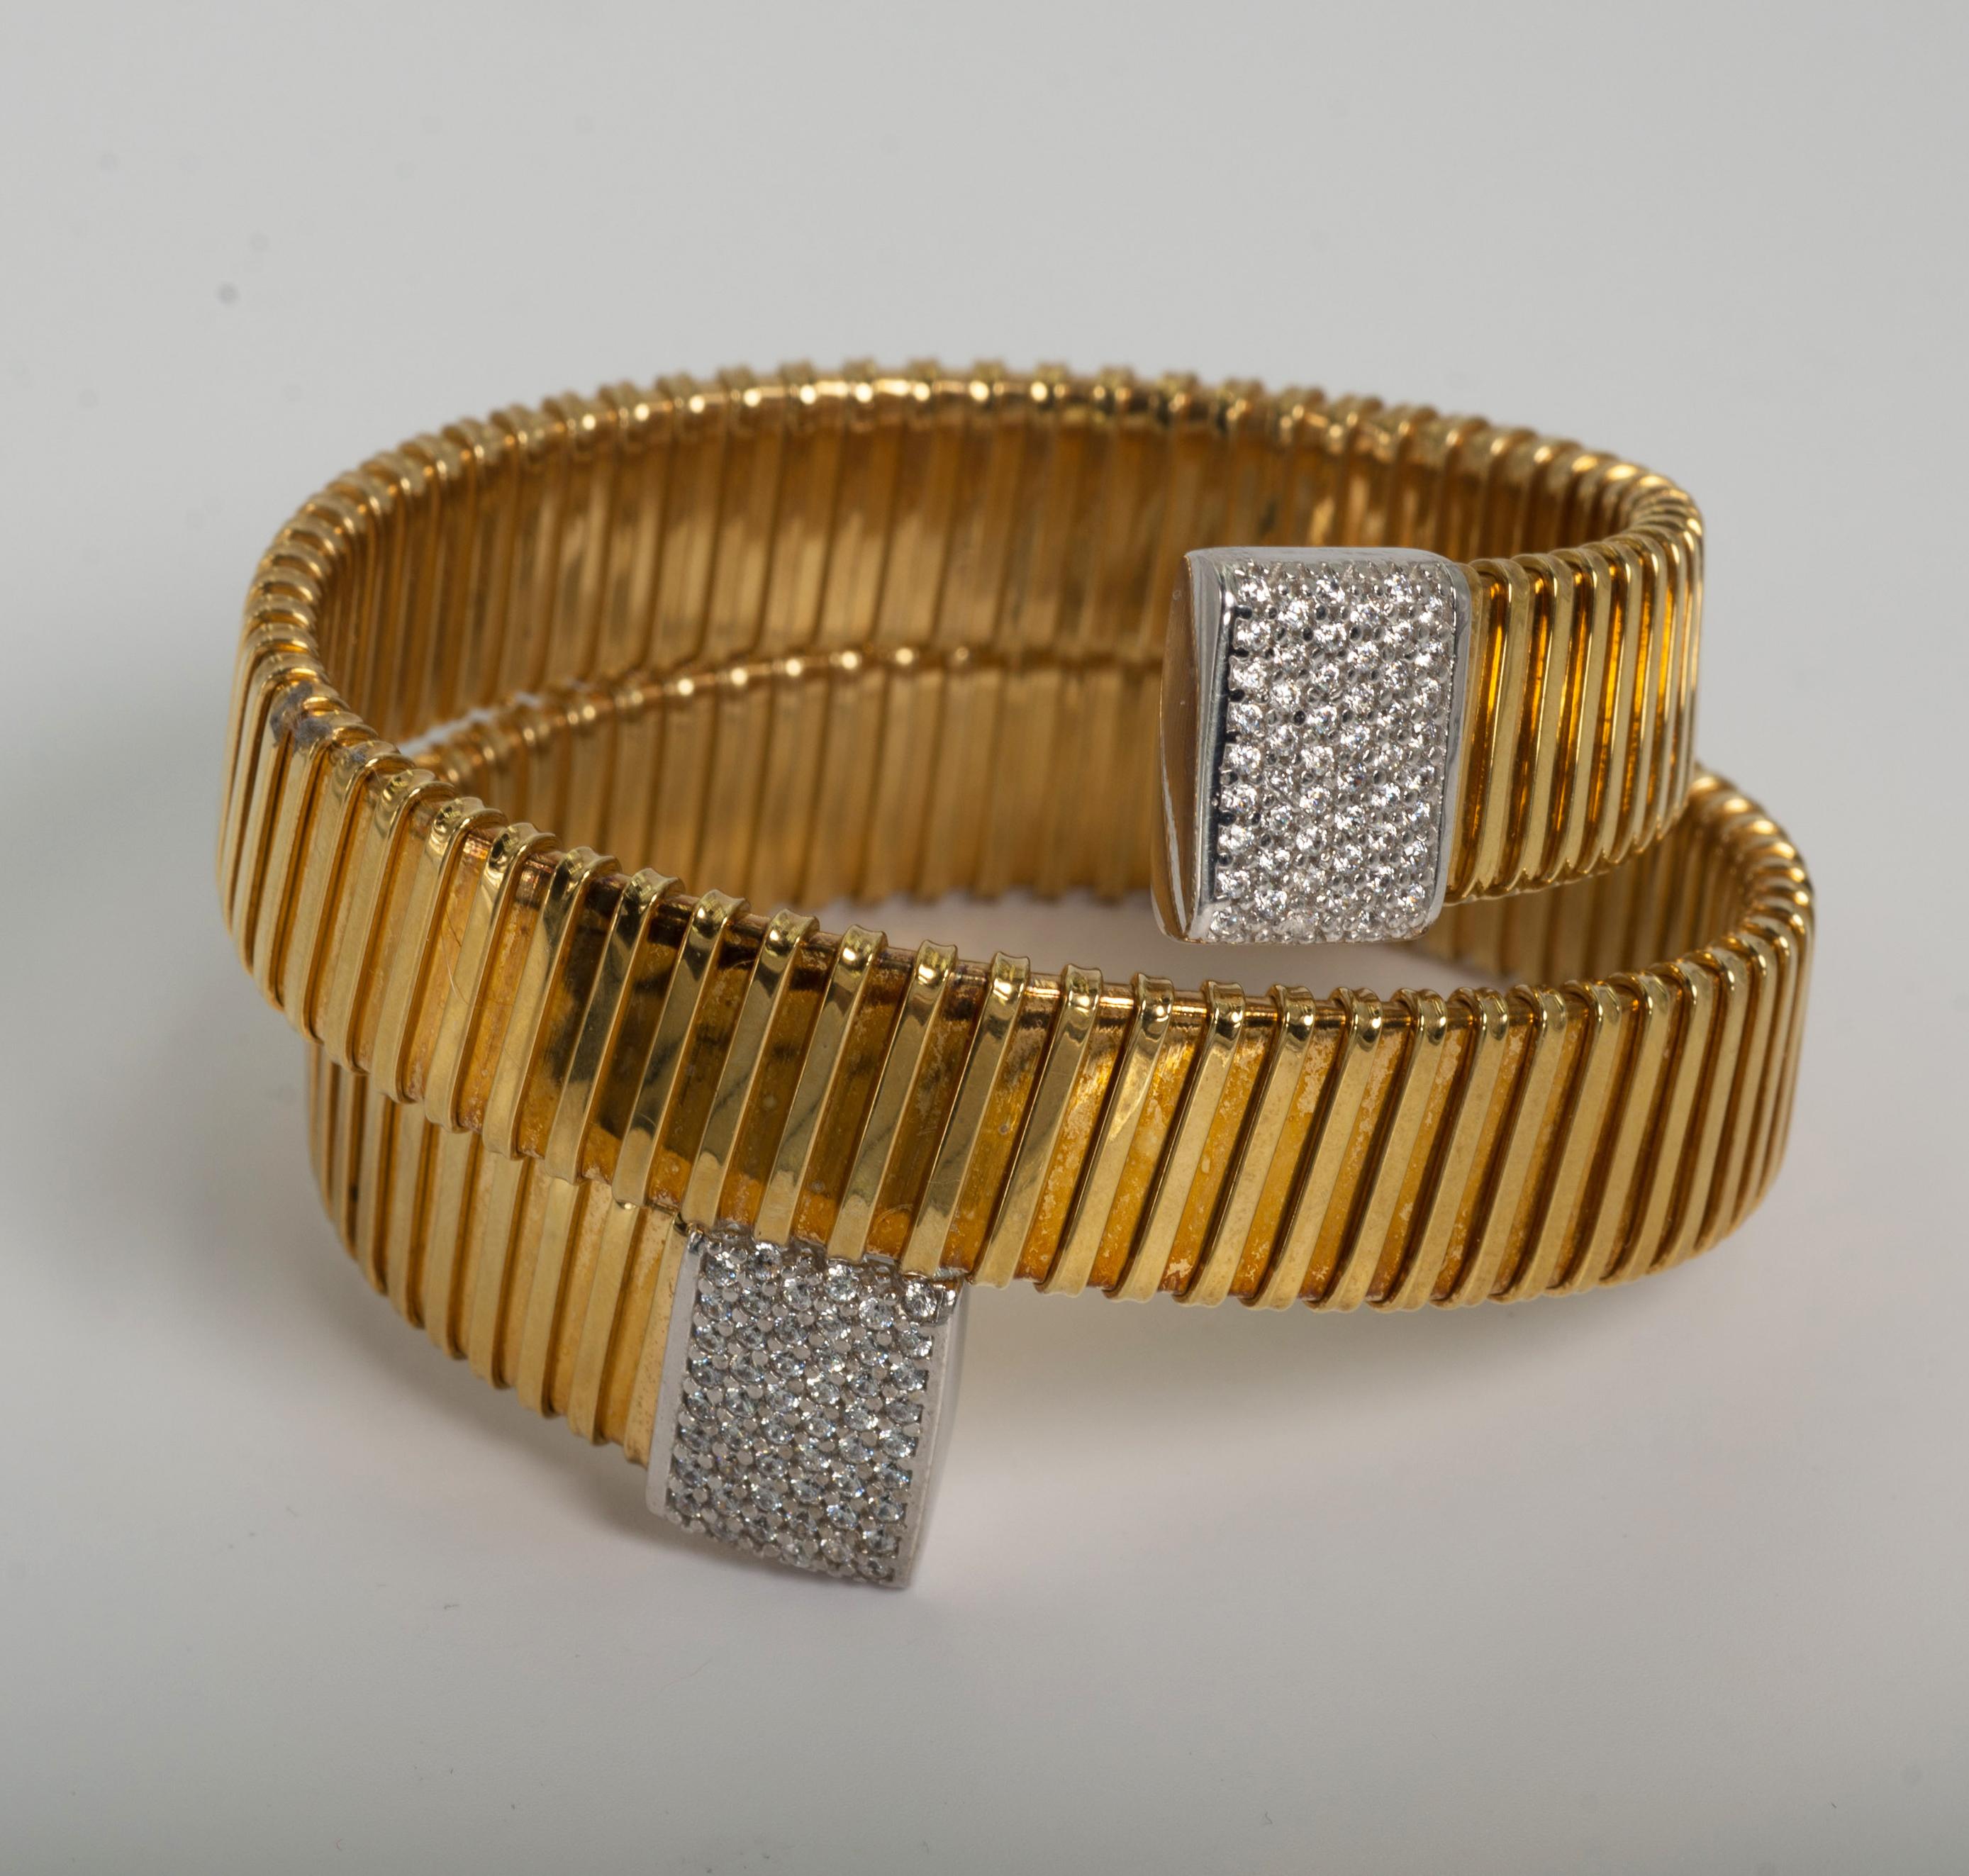 Micheletto  pave cubic zirconia gold vermeil sterling double wrap Roma bracelet. Amazing quality. Will up to an 8'' wrist or smaller.